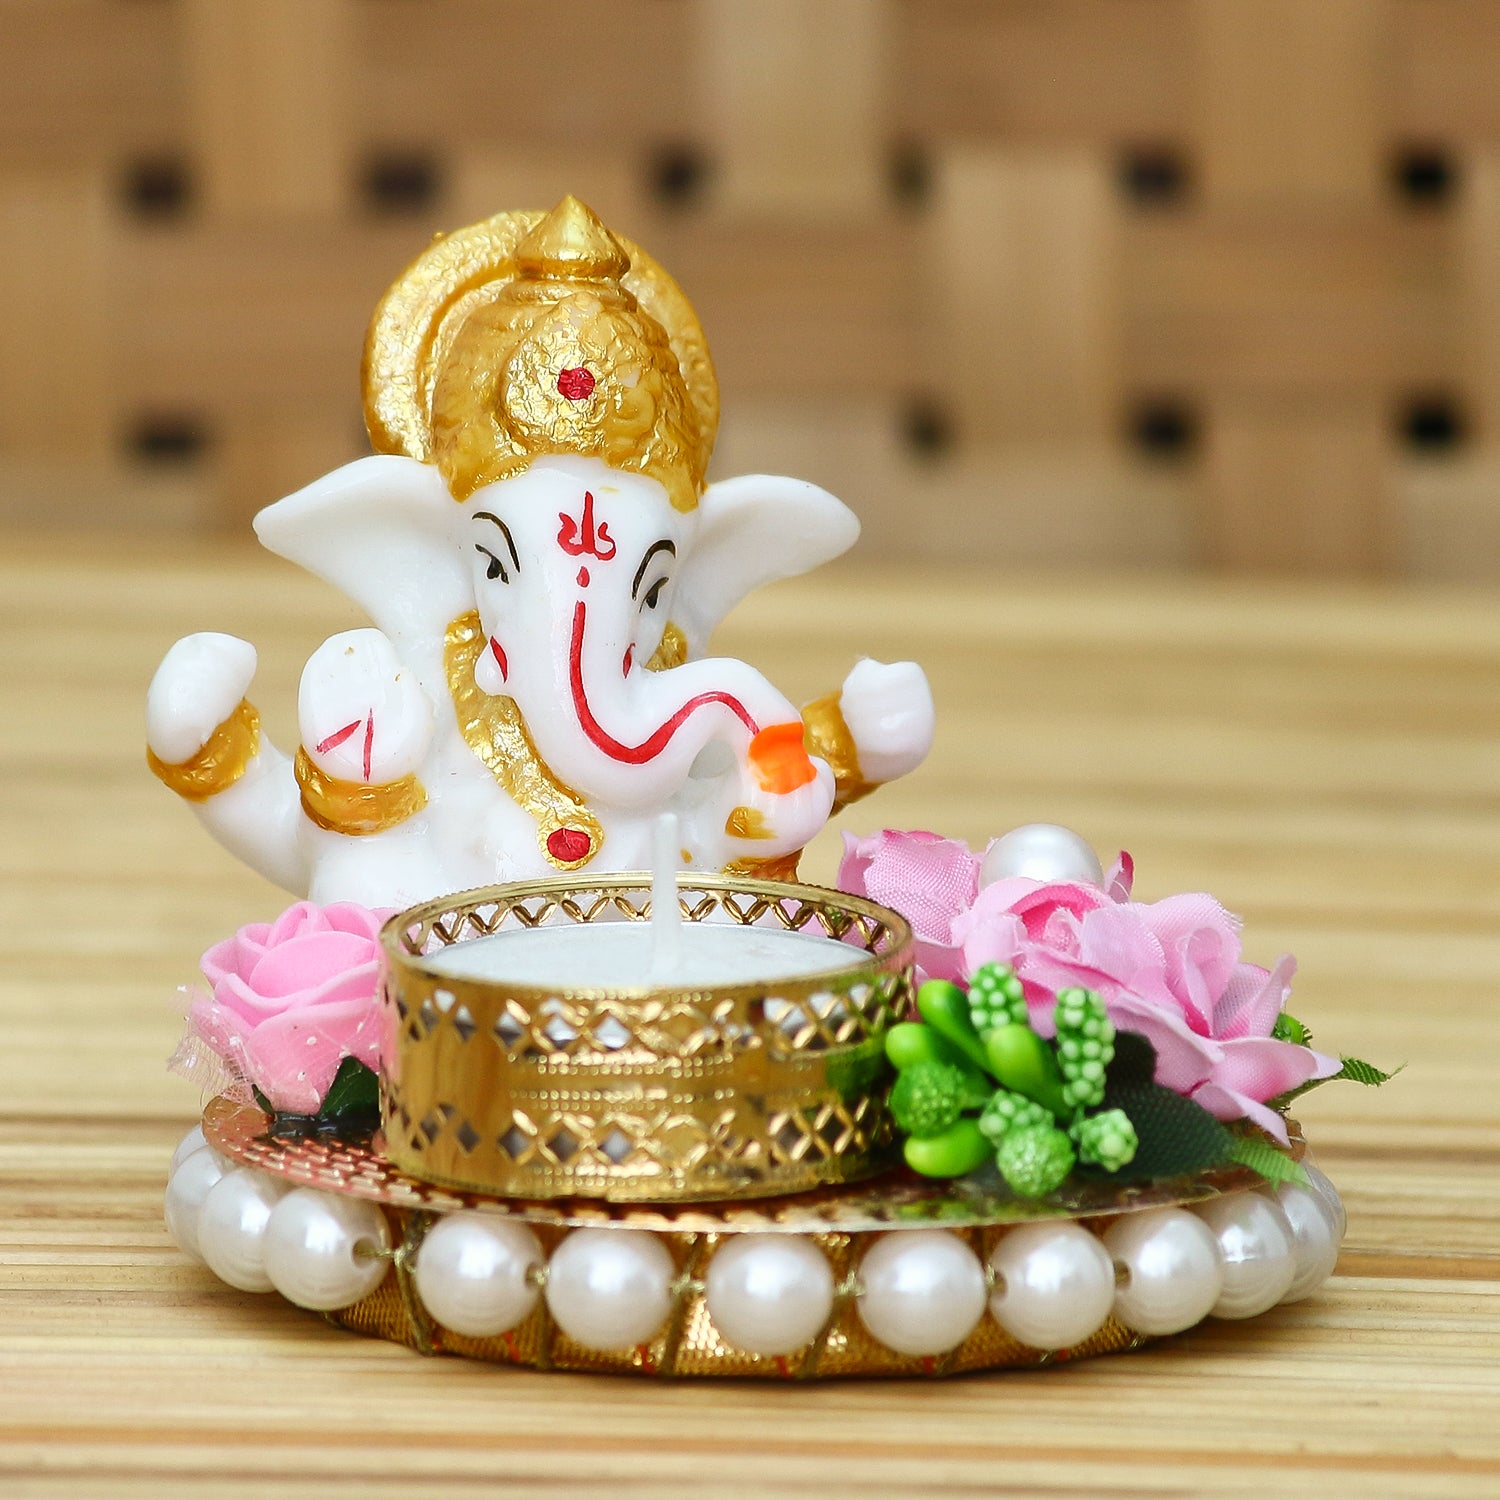 Polyresin Lord Ganesha Idol on Decorative Metal Plate with Tea Light Holder (Pink, Green and White) 2